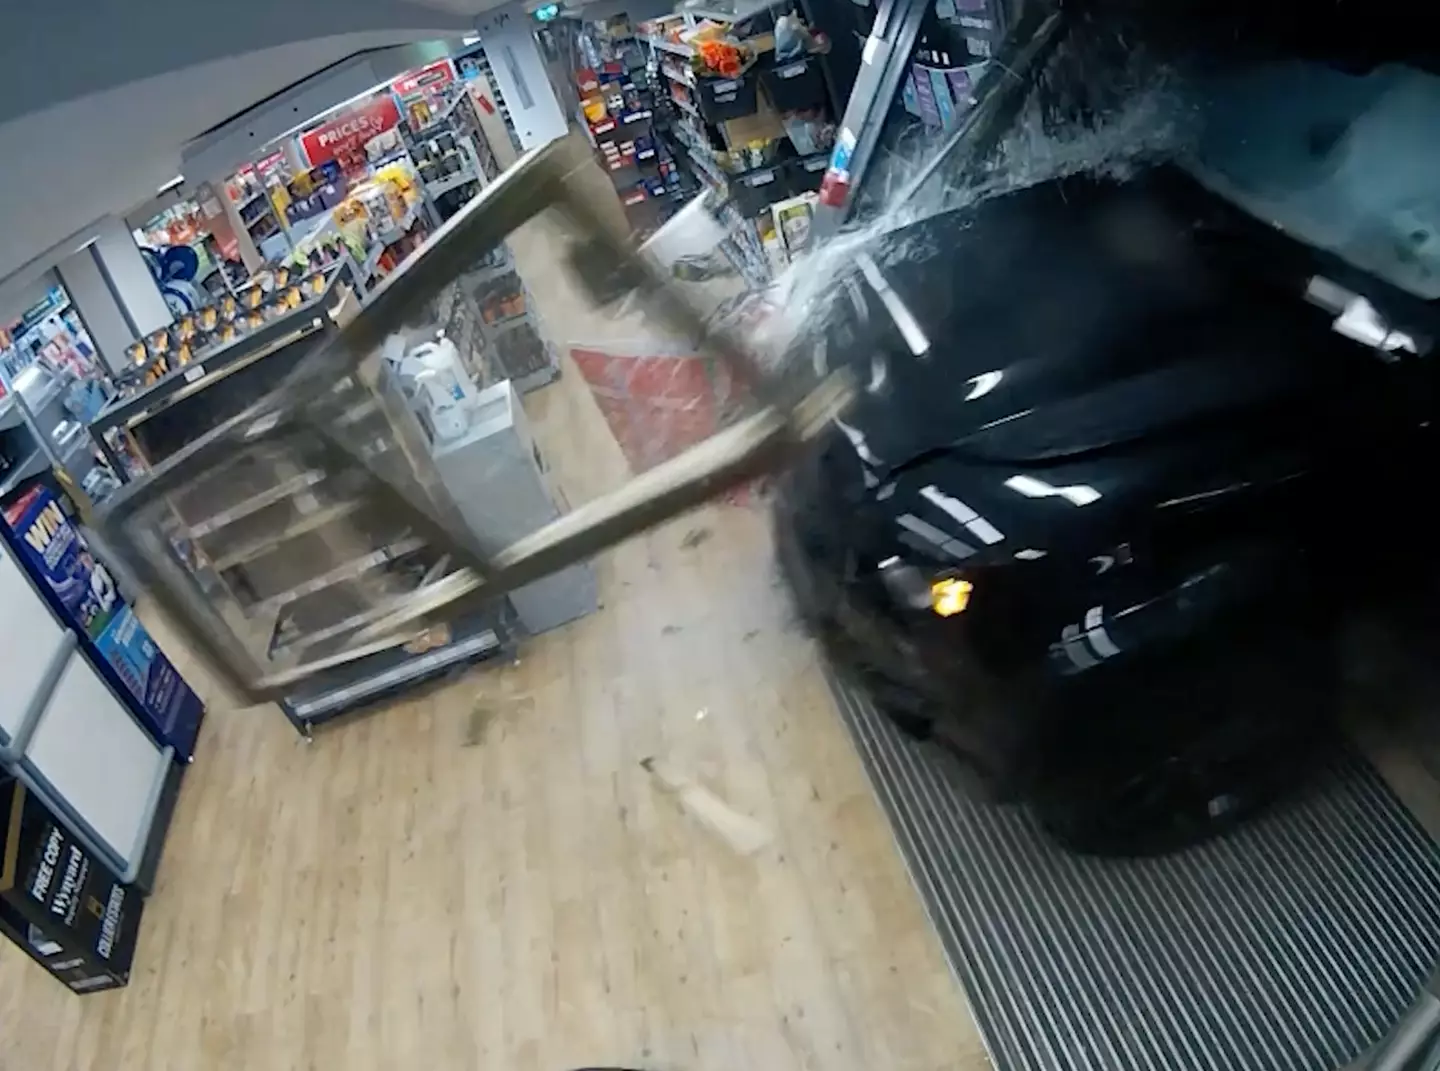 Shocking CCTV footage shows ex-Premier League footballer Danny Graham crash his Land Rover into a Co-op after drinking '10 pints'.